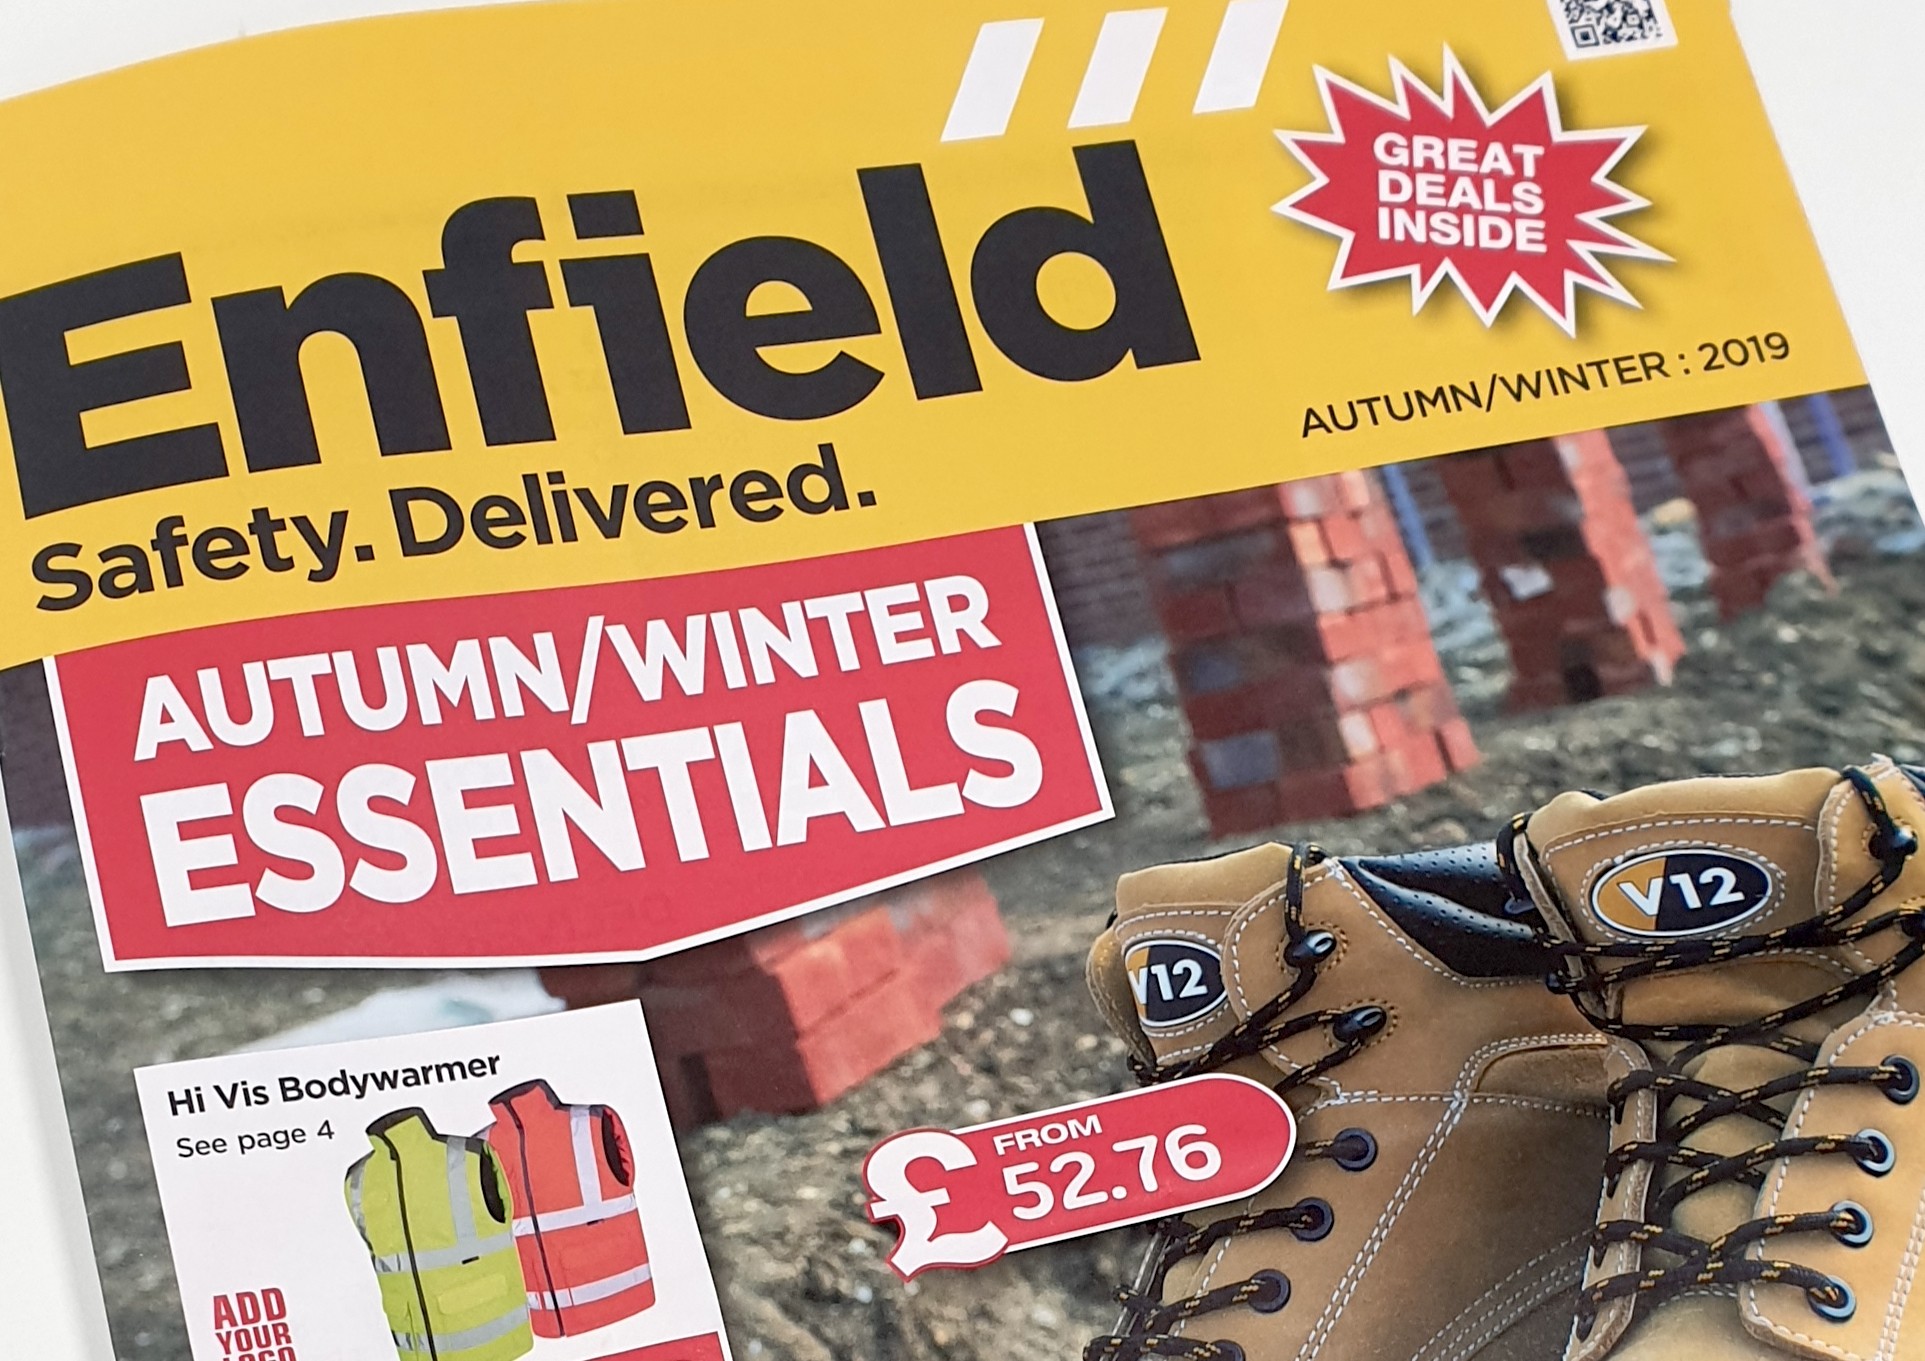 New Autumn/Winter Site Essentials Out Now!